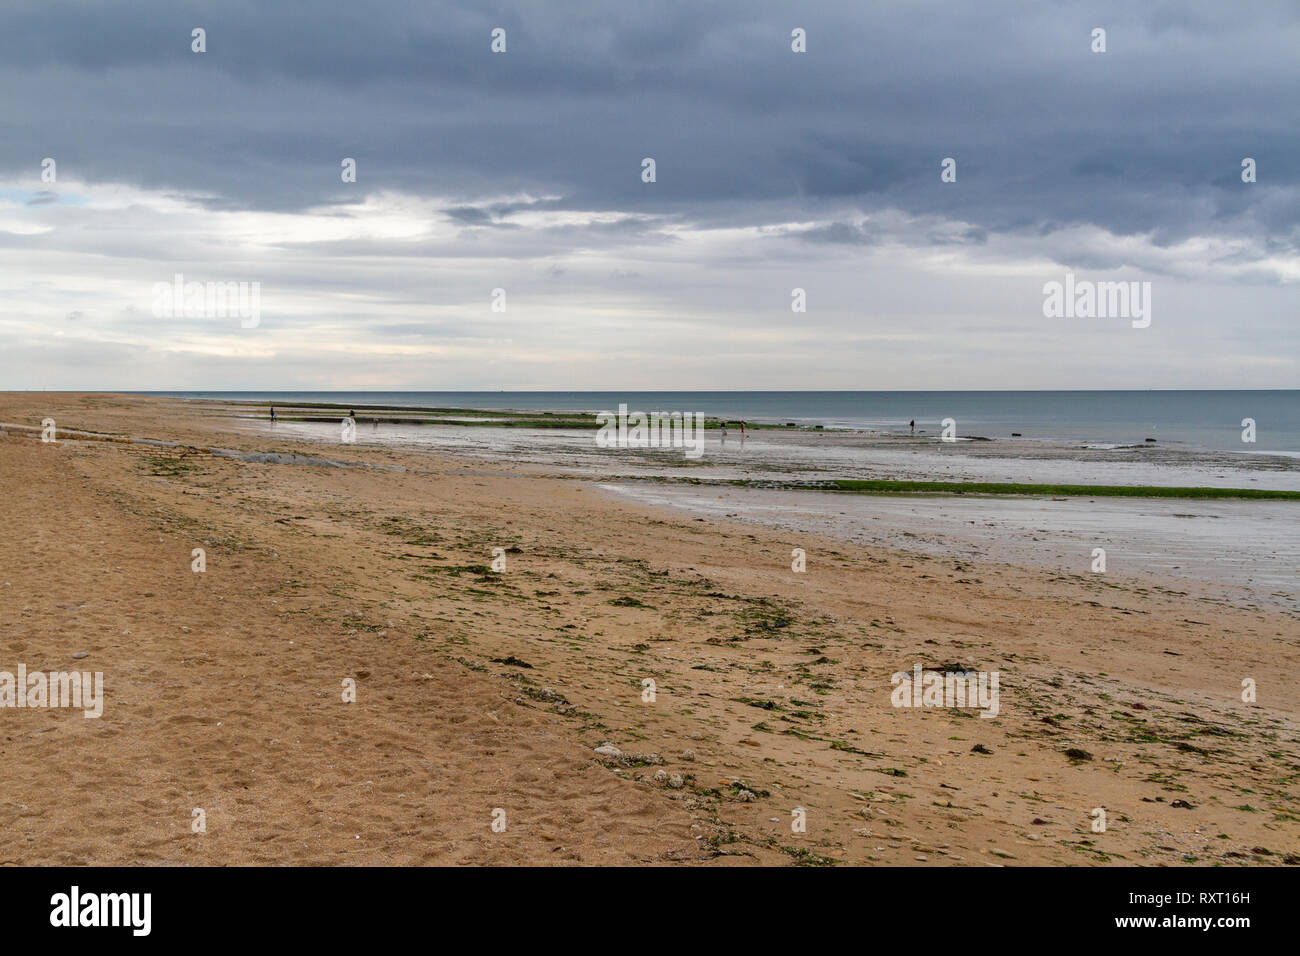 Looking over the Sword Beach area of the D-Day landings at Luc-sur-Mer, Normandy, France (looking approx NW). Stock Photo